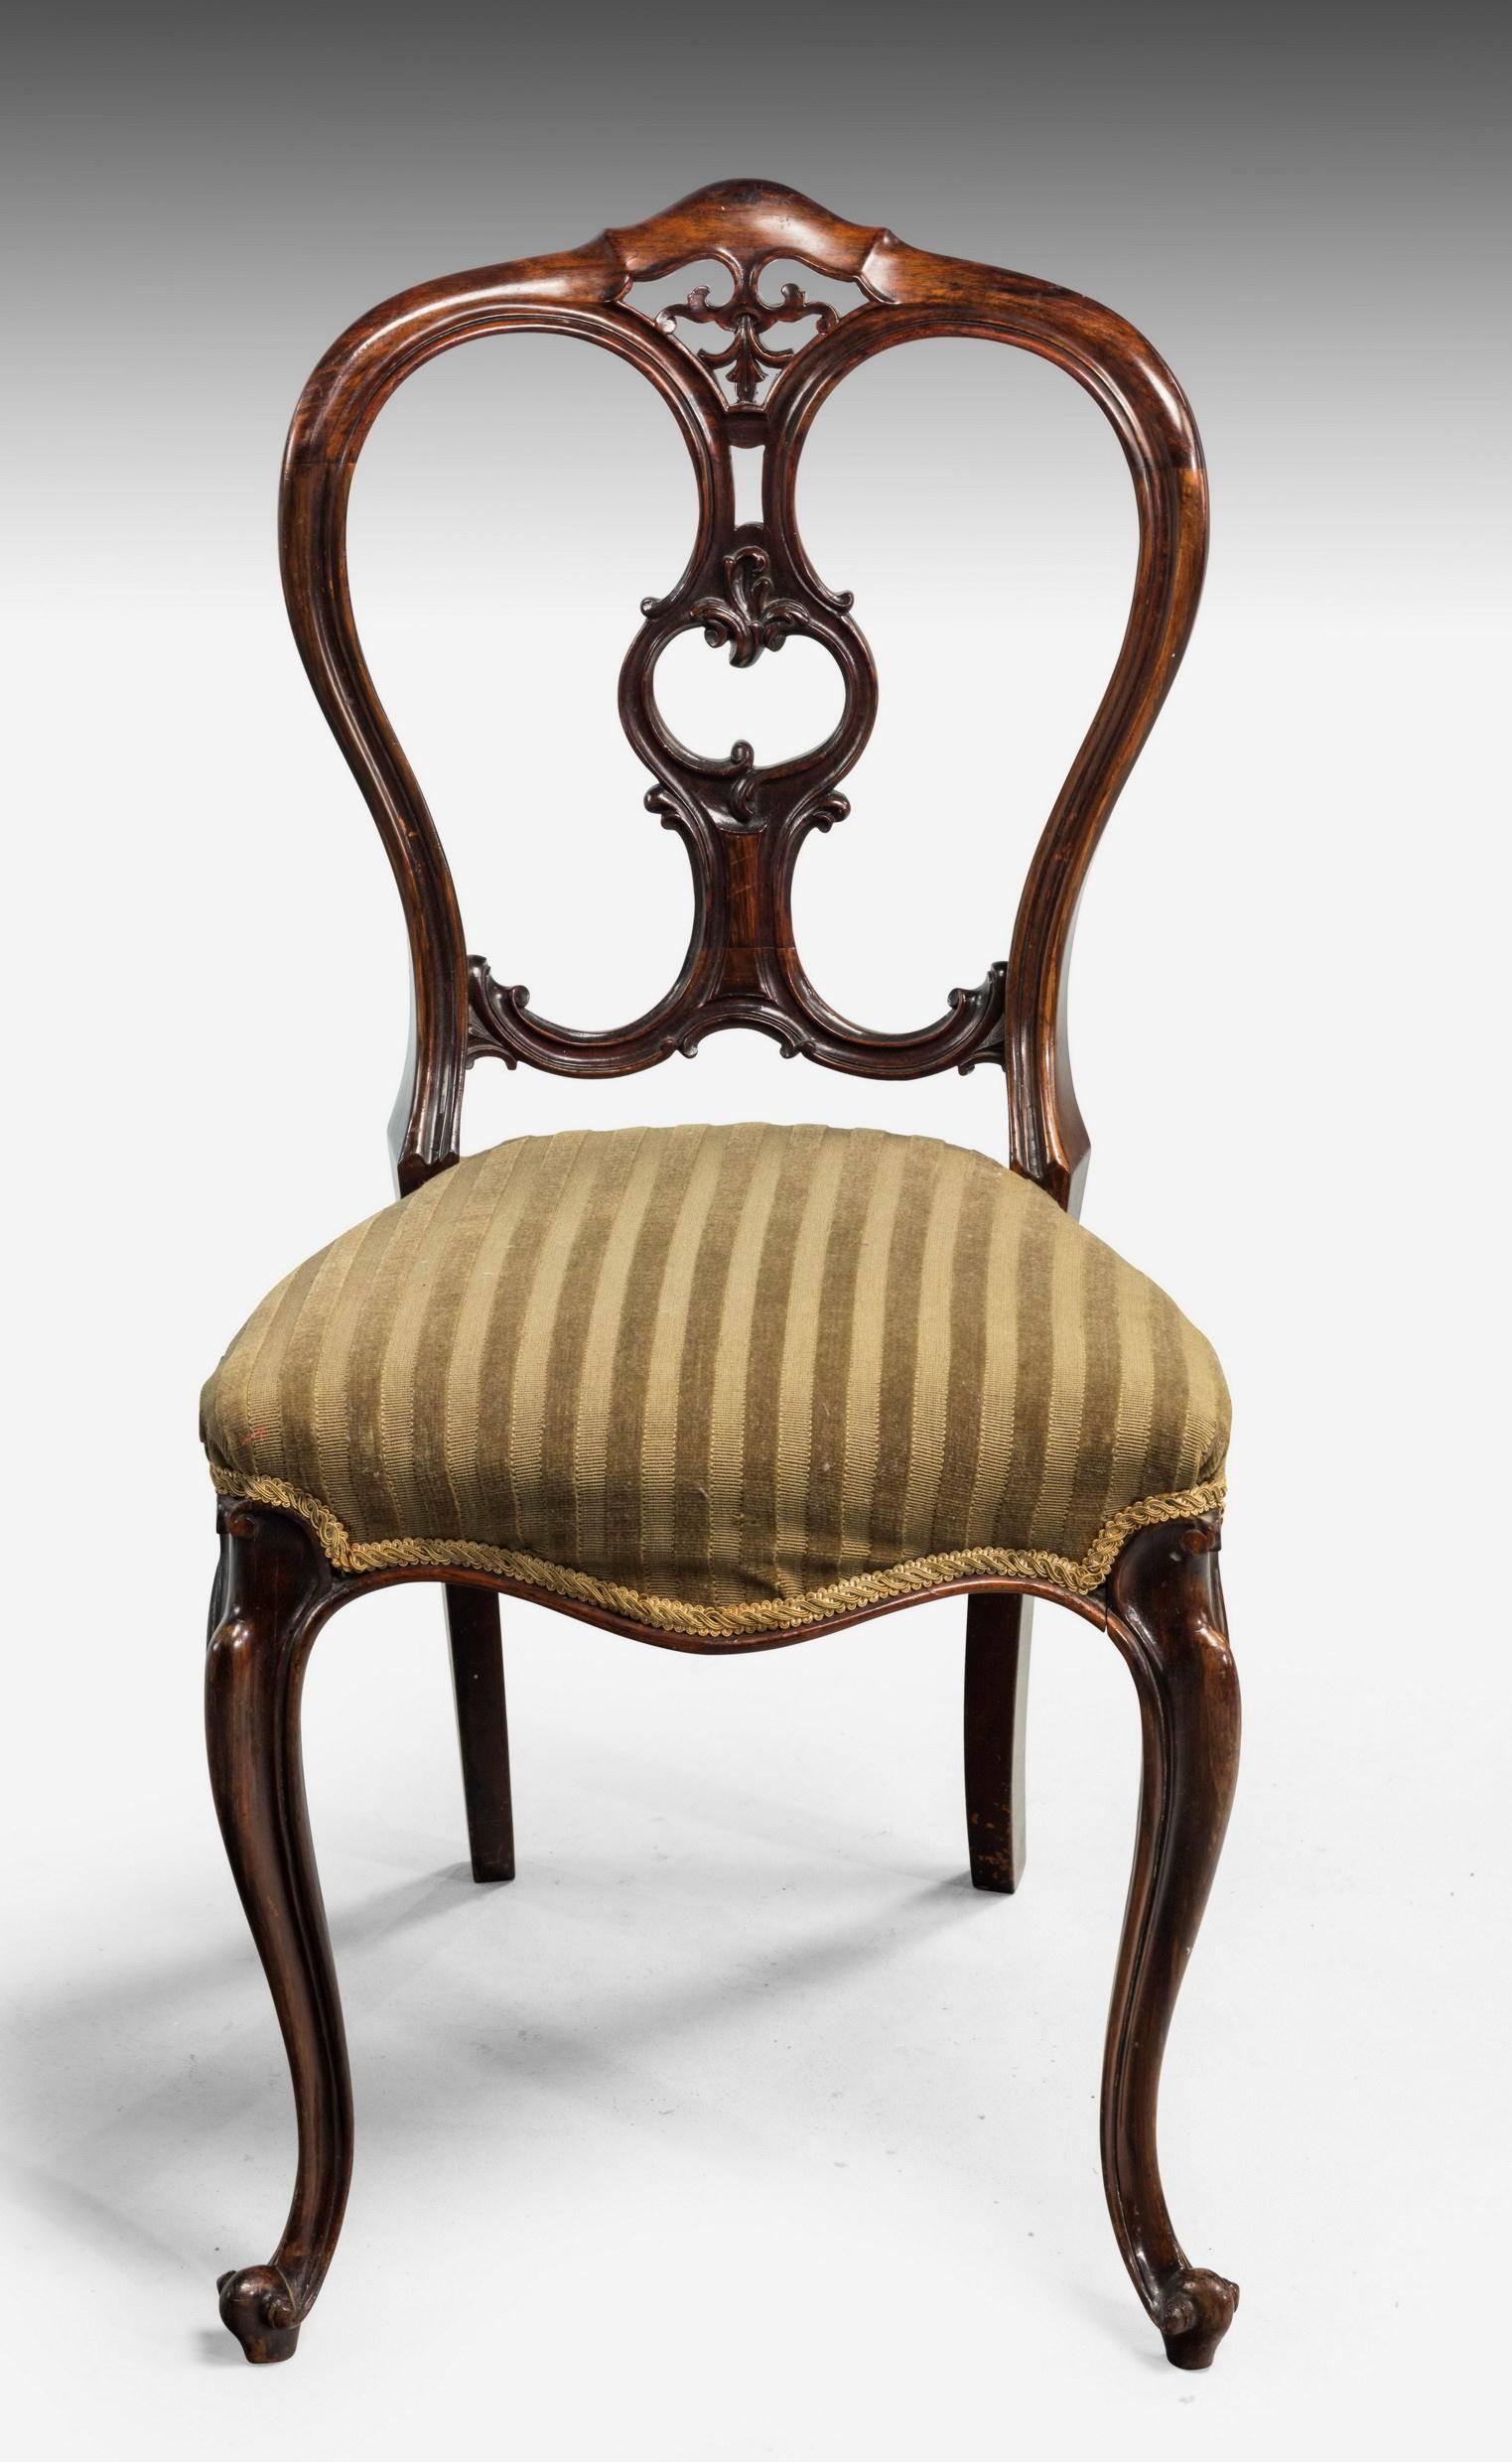 Set of Six Mid-Victorian Balloon Back Chairs In Good Condition In Peterborough, Northamptonshire